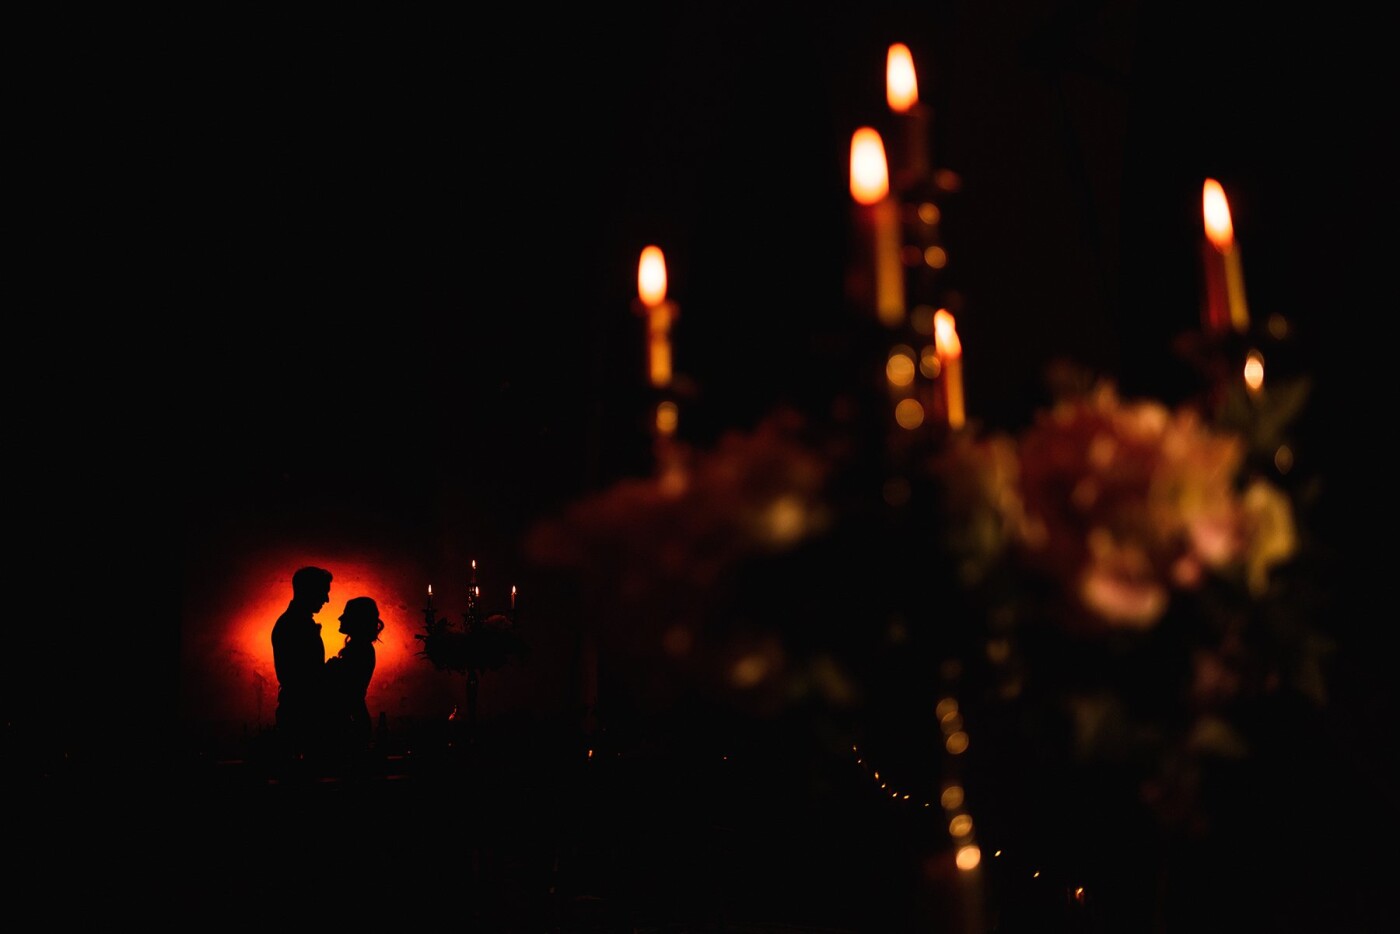 This photograph was taken at a wedding in Tuscany, Italy. I wanted the light behind the bride and groom to be the same as the colour of the candles in the foreground.